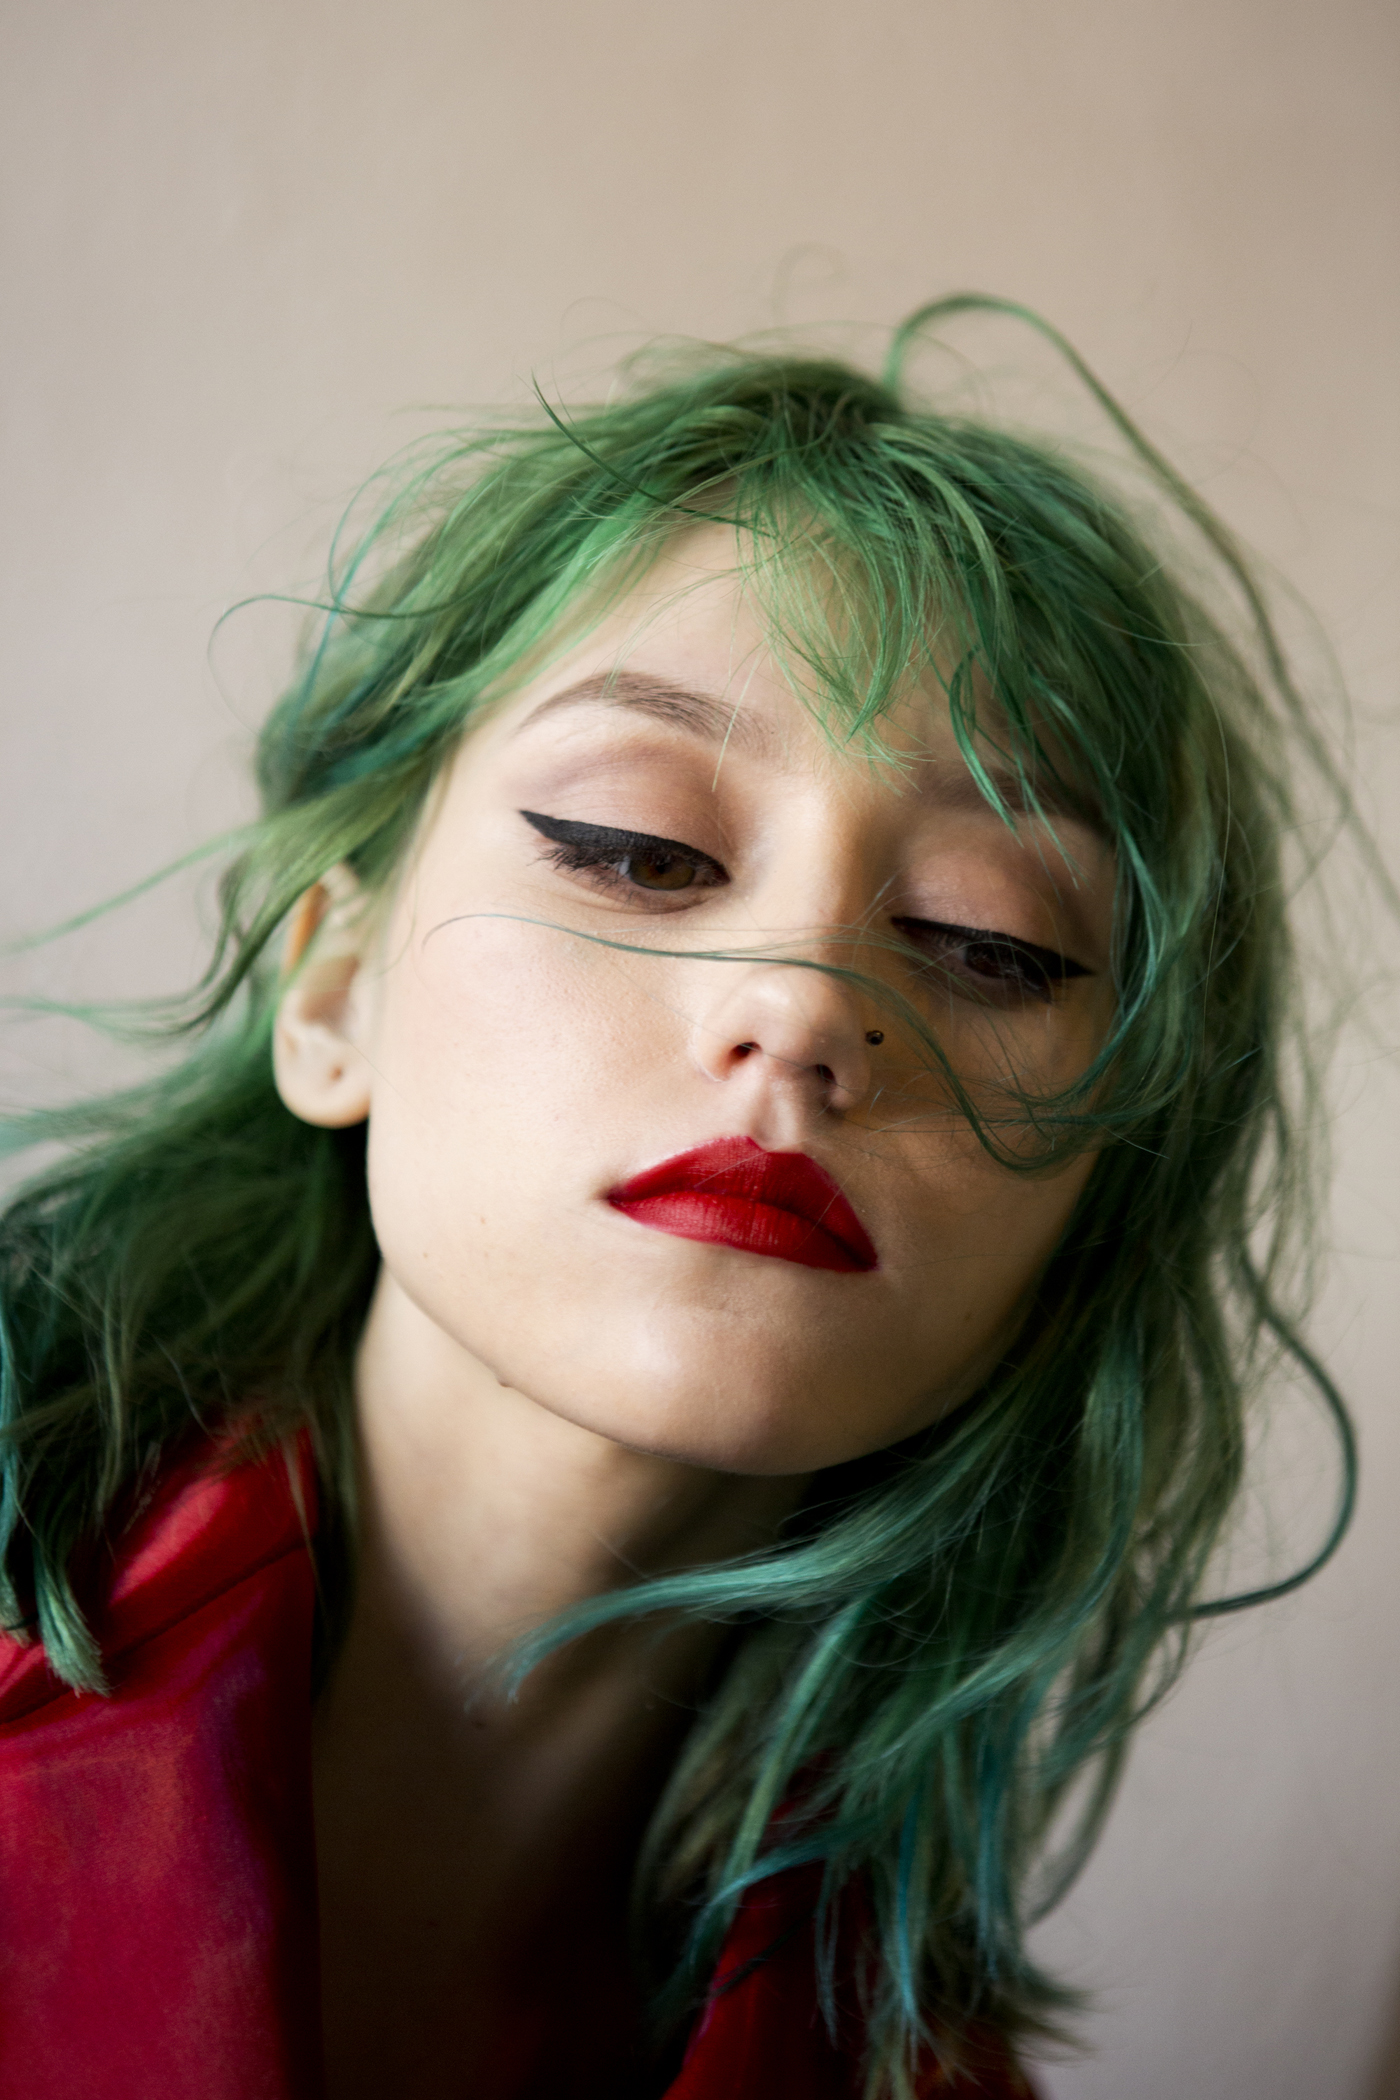 KAILEE MORGUE HARNESSES THE POWER OF THE INTERNET TO SHARE HER DARK POP | THE LAST ...